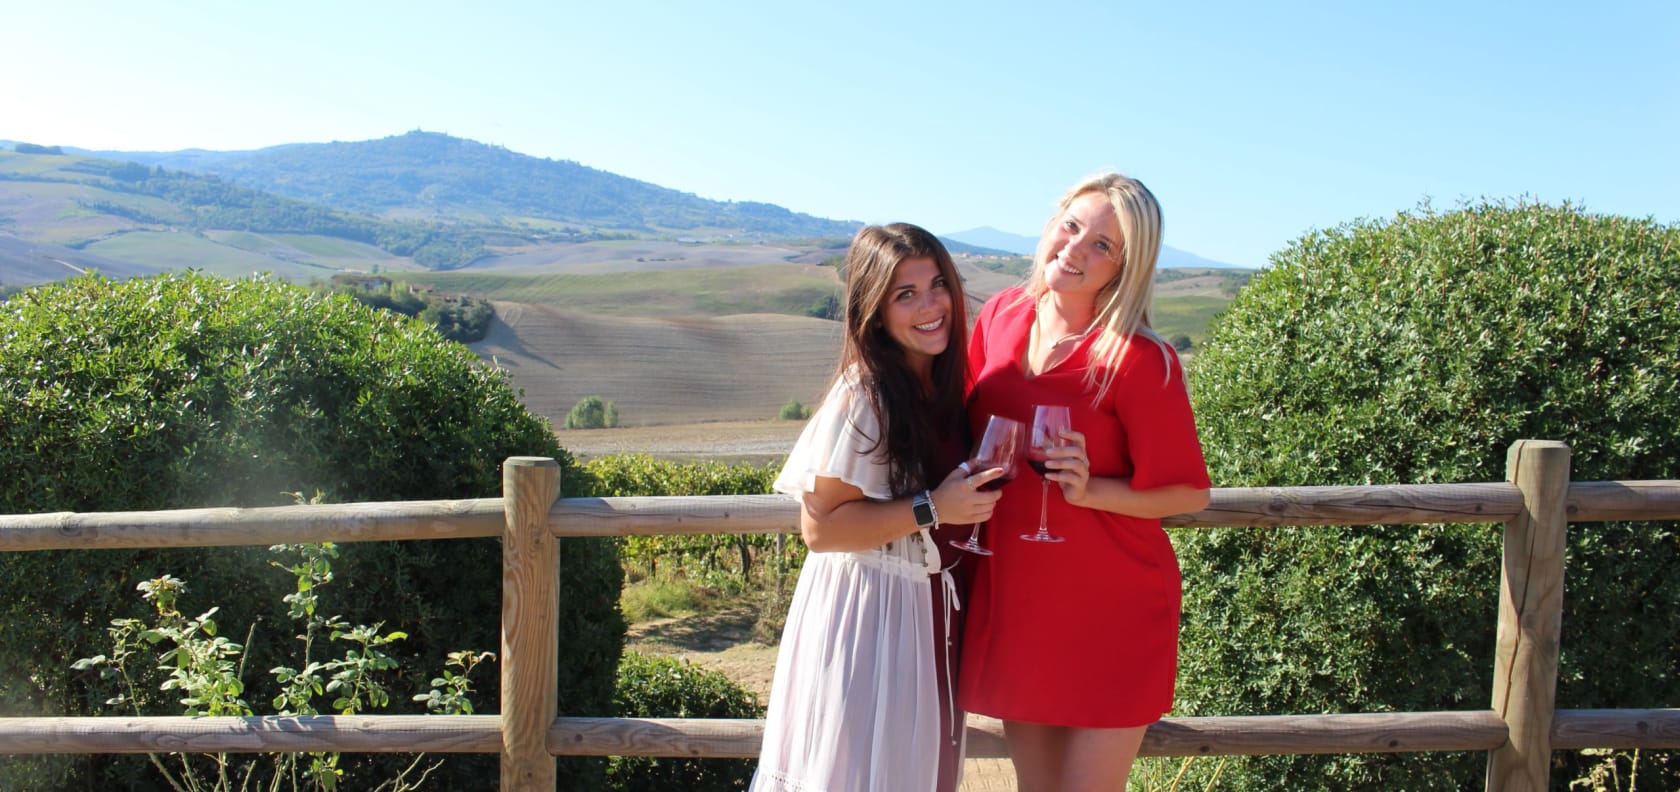 Two girls smiling holding wine.